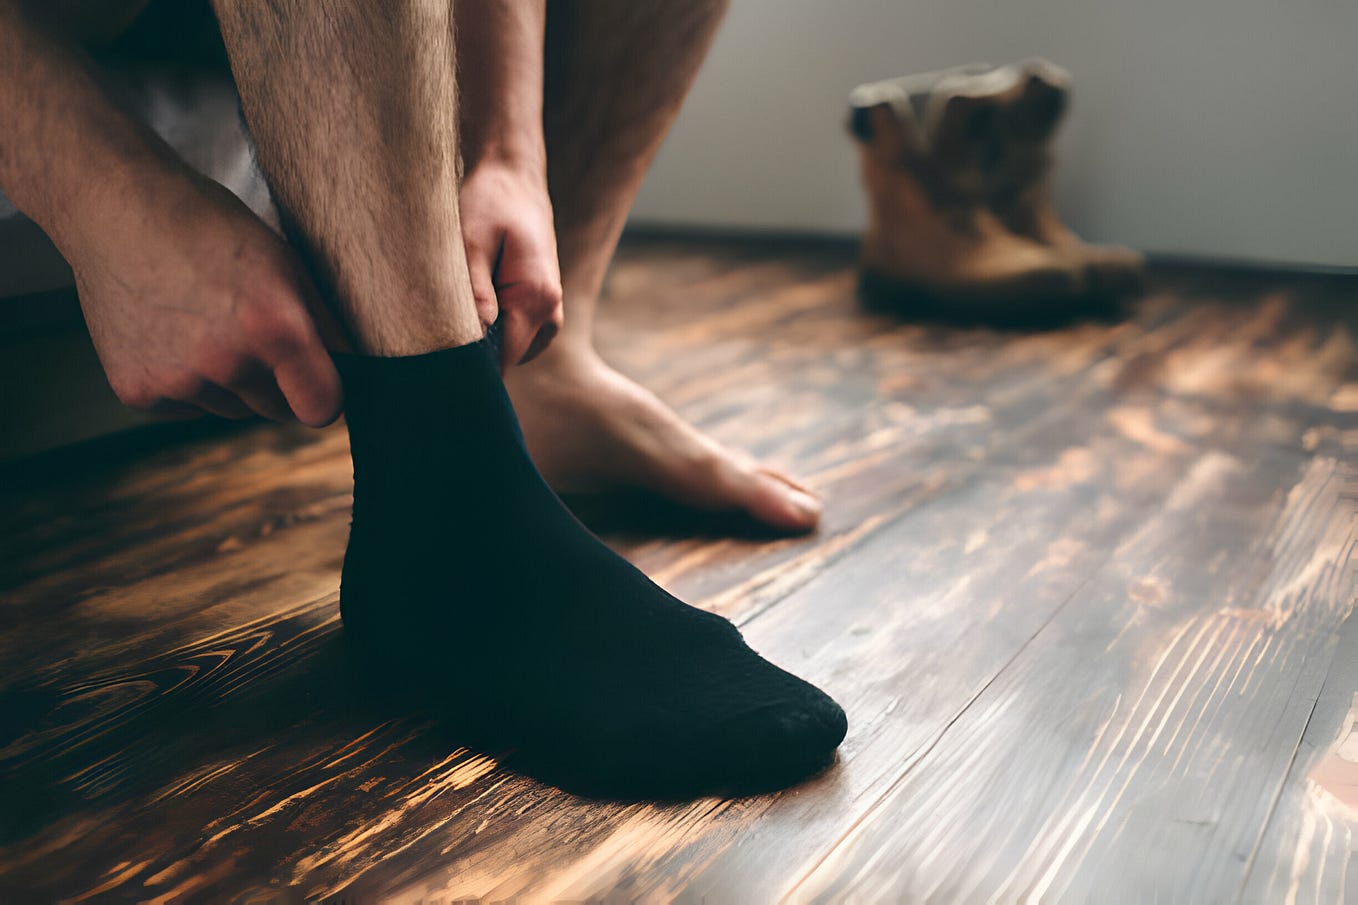 Men’s Ankle Socks: Your Secret to All-Day Comfort | by Hifen Group ...